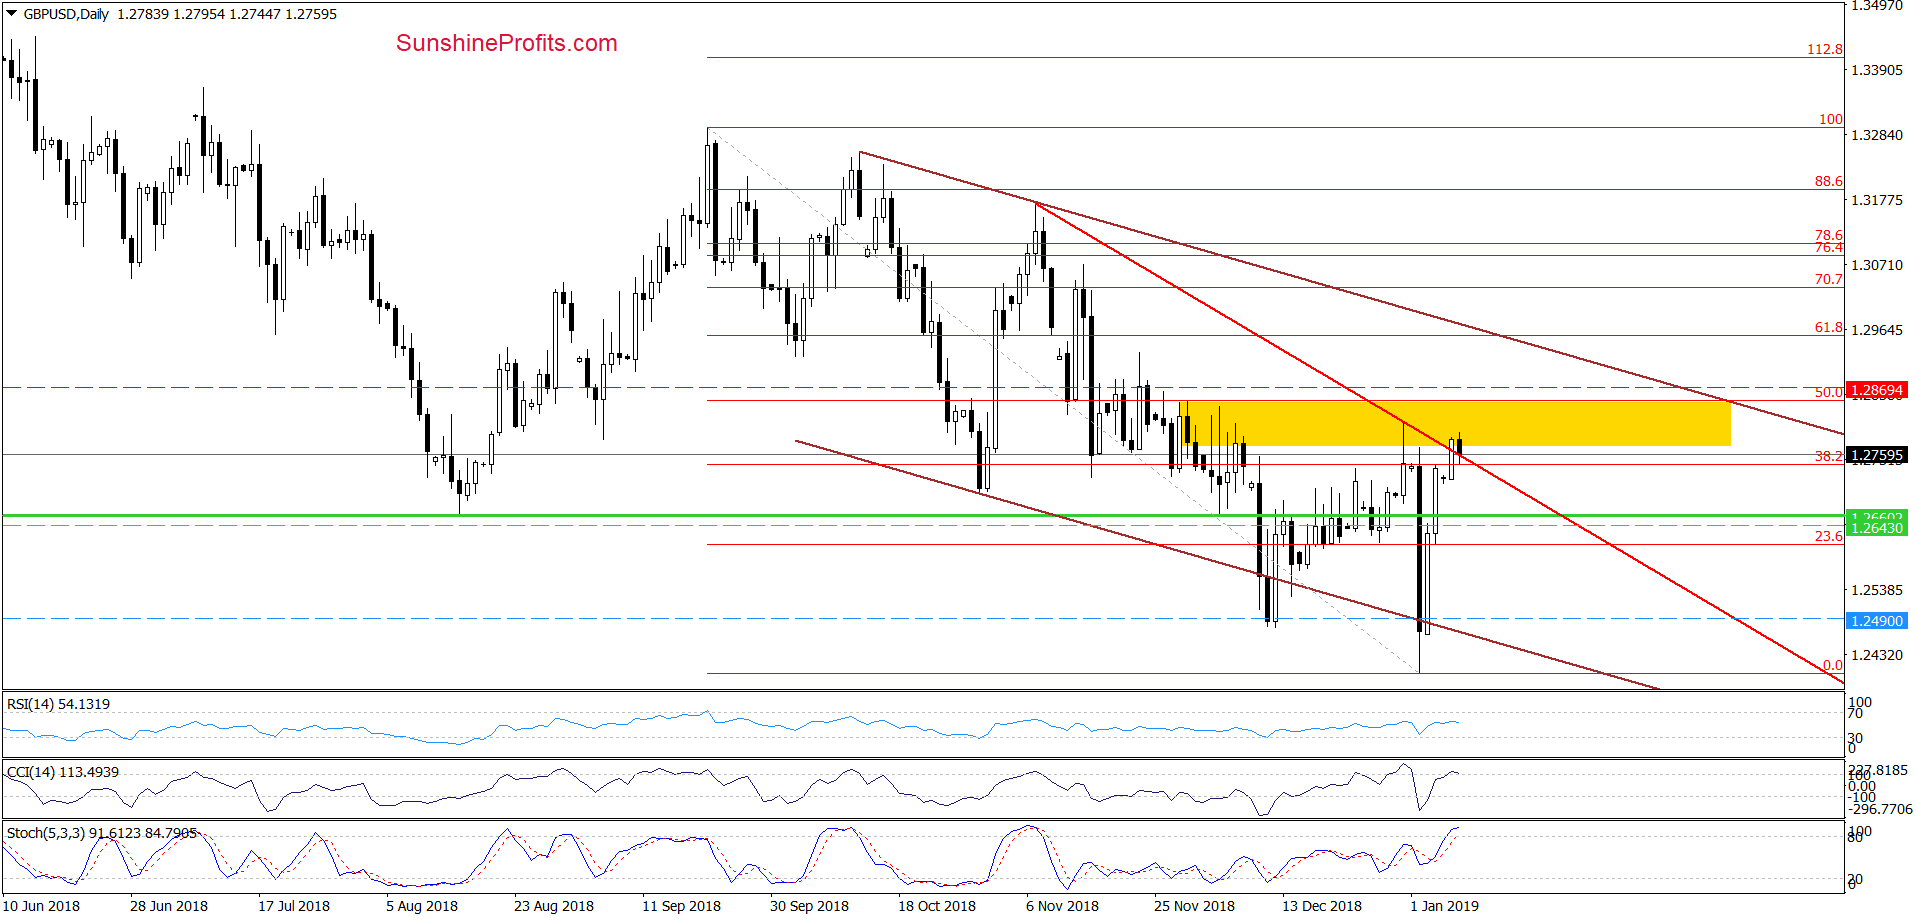 GBP/USD - daily chart